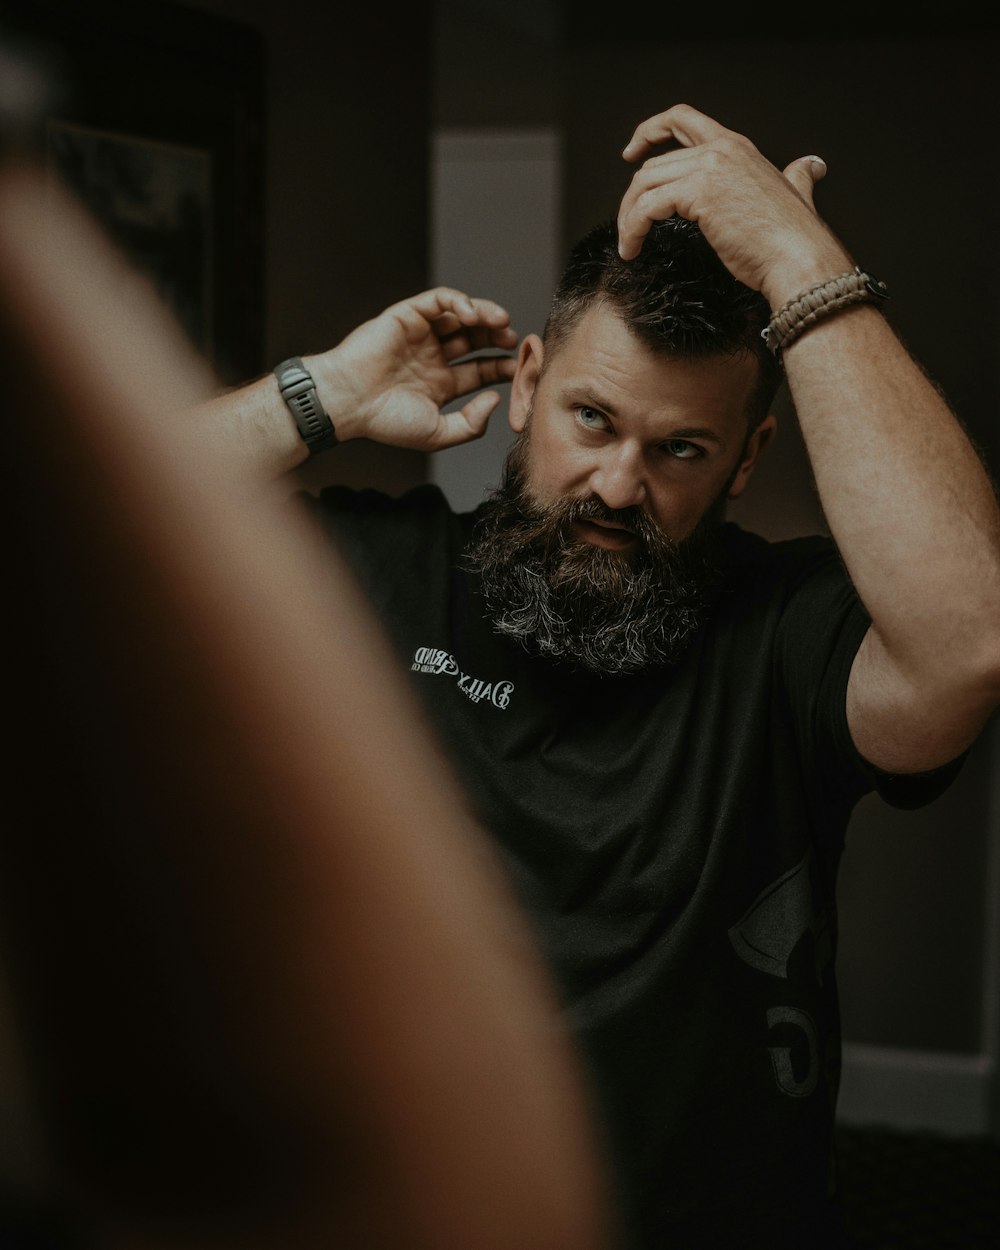 a man with a goatee combing his hair